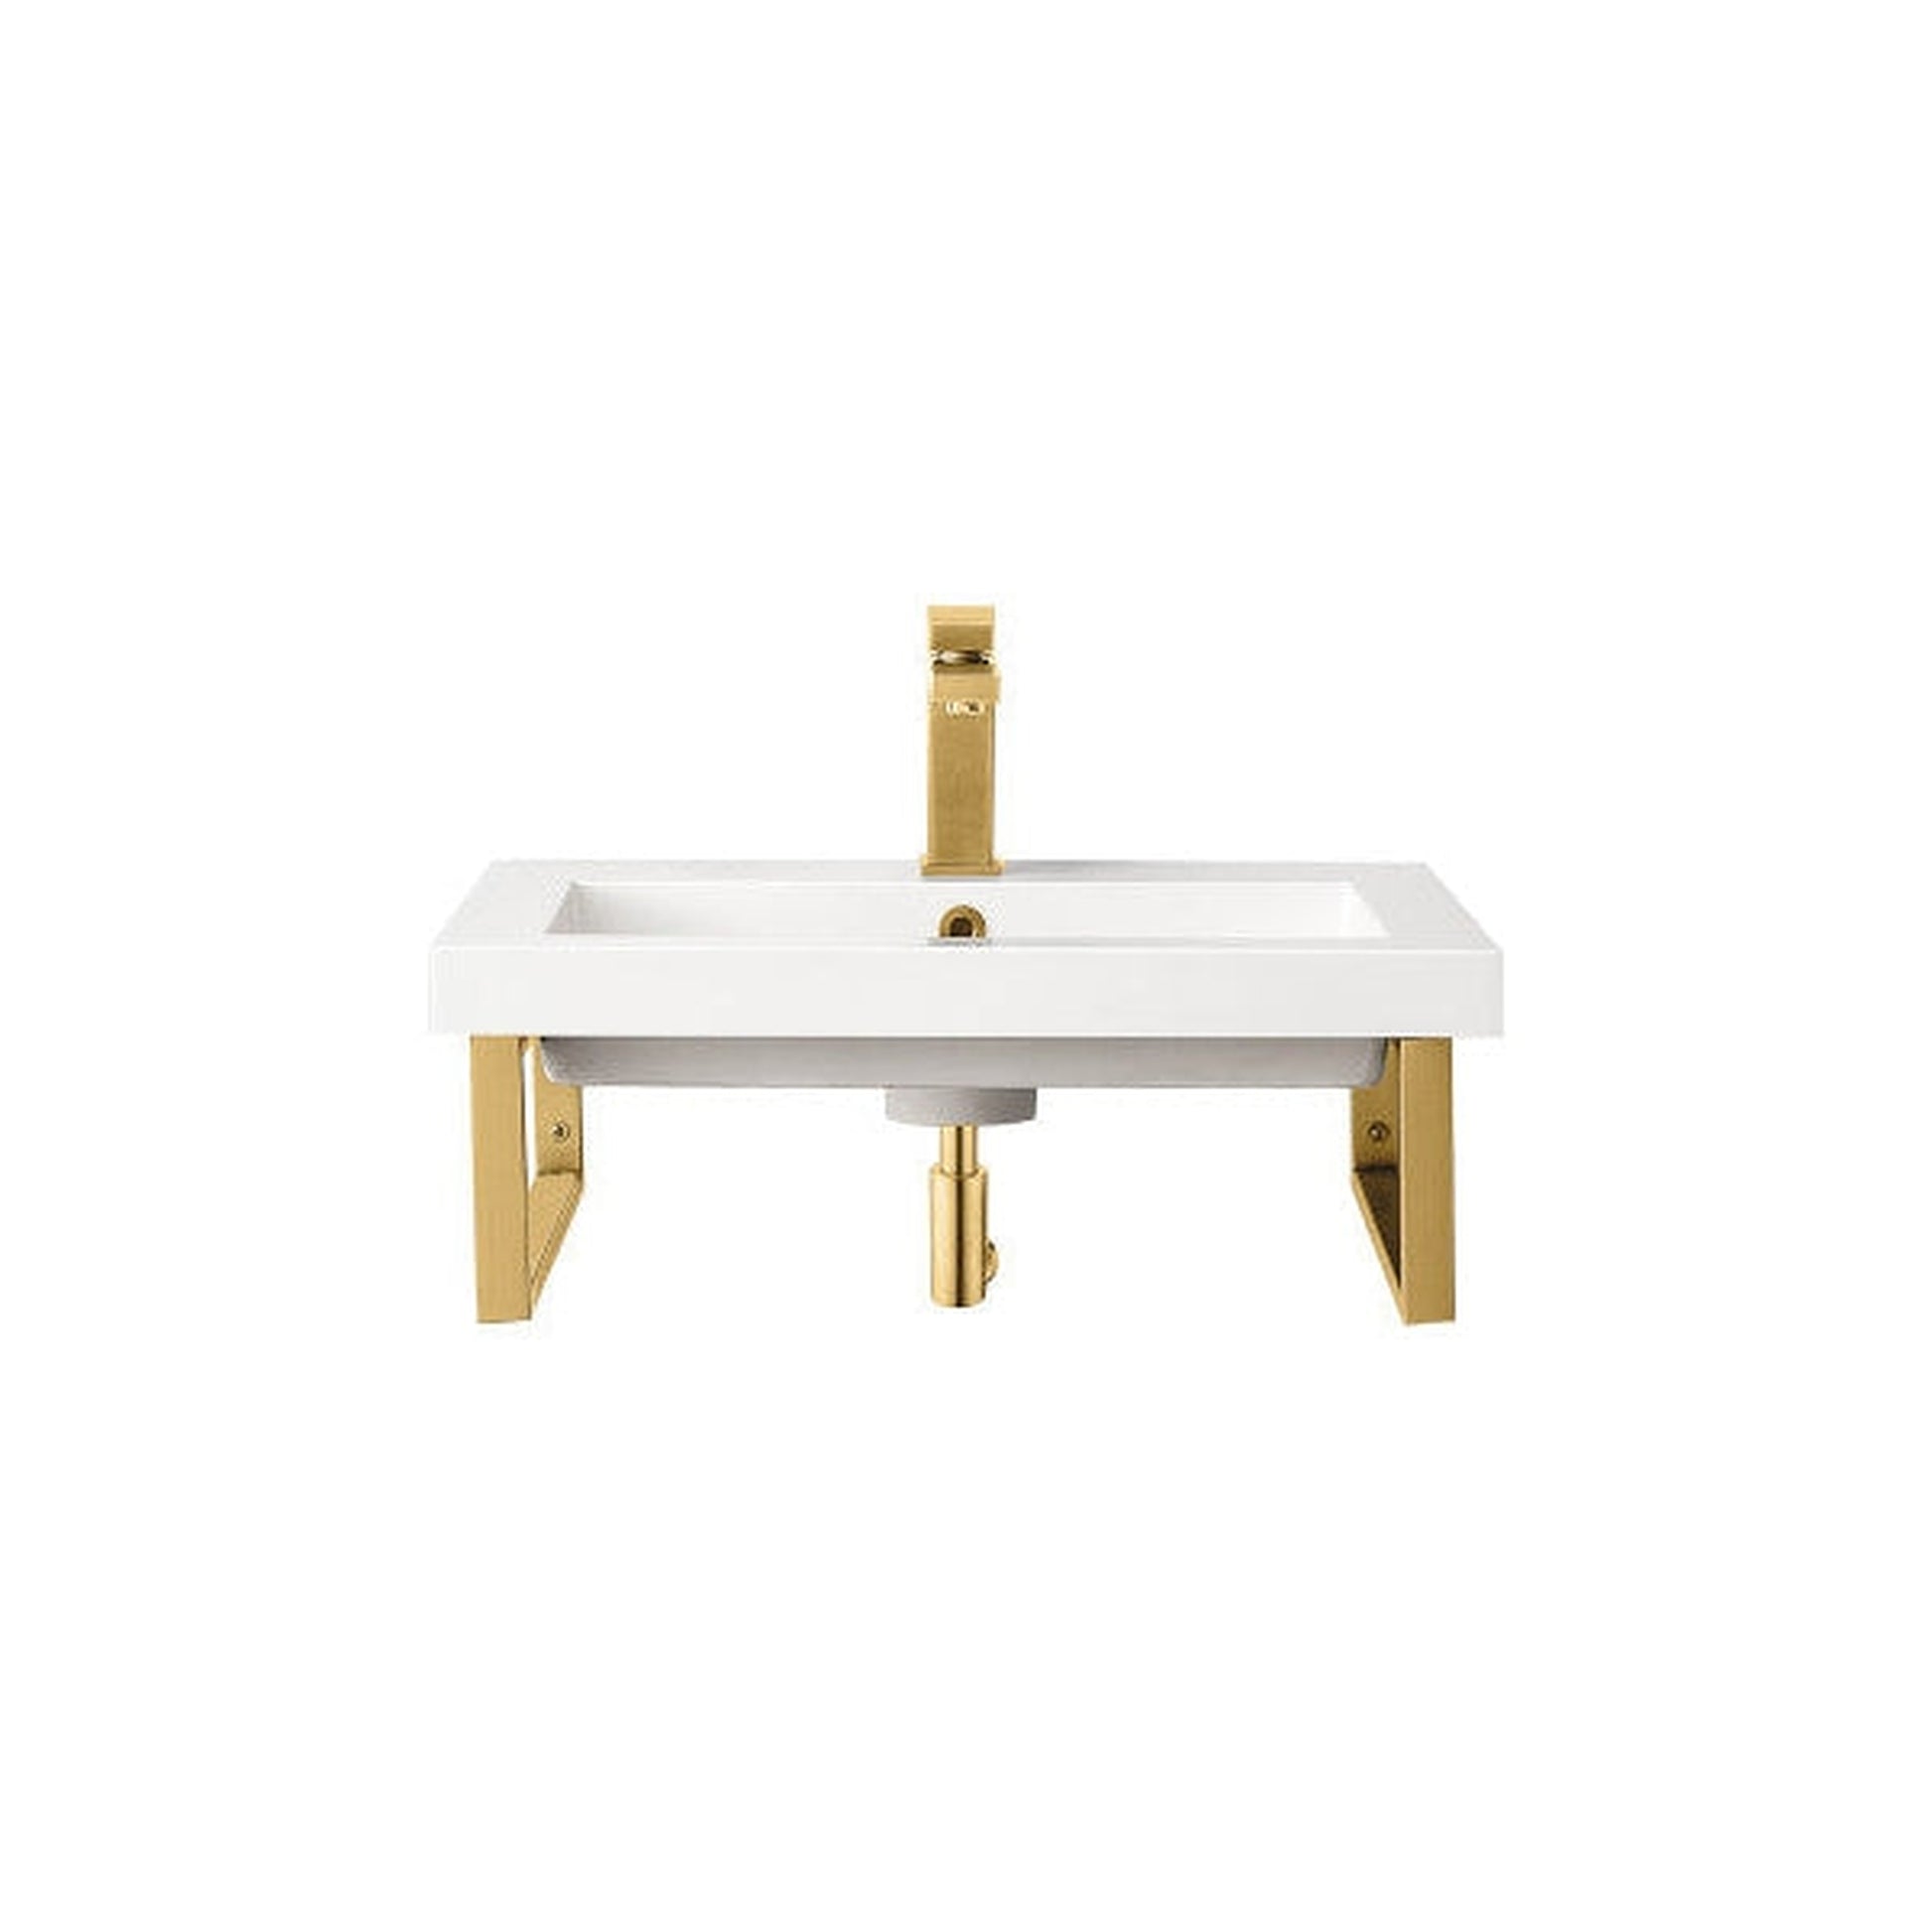 James Martin Boston 18" Two Radiant Gold Stainless Steel Wall Bracket With 24" White Glossy Composite Countertop